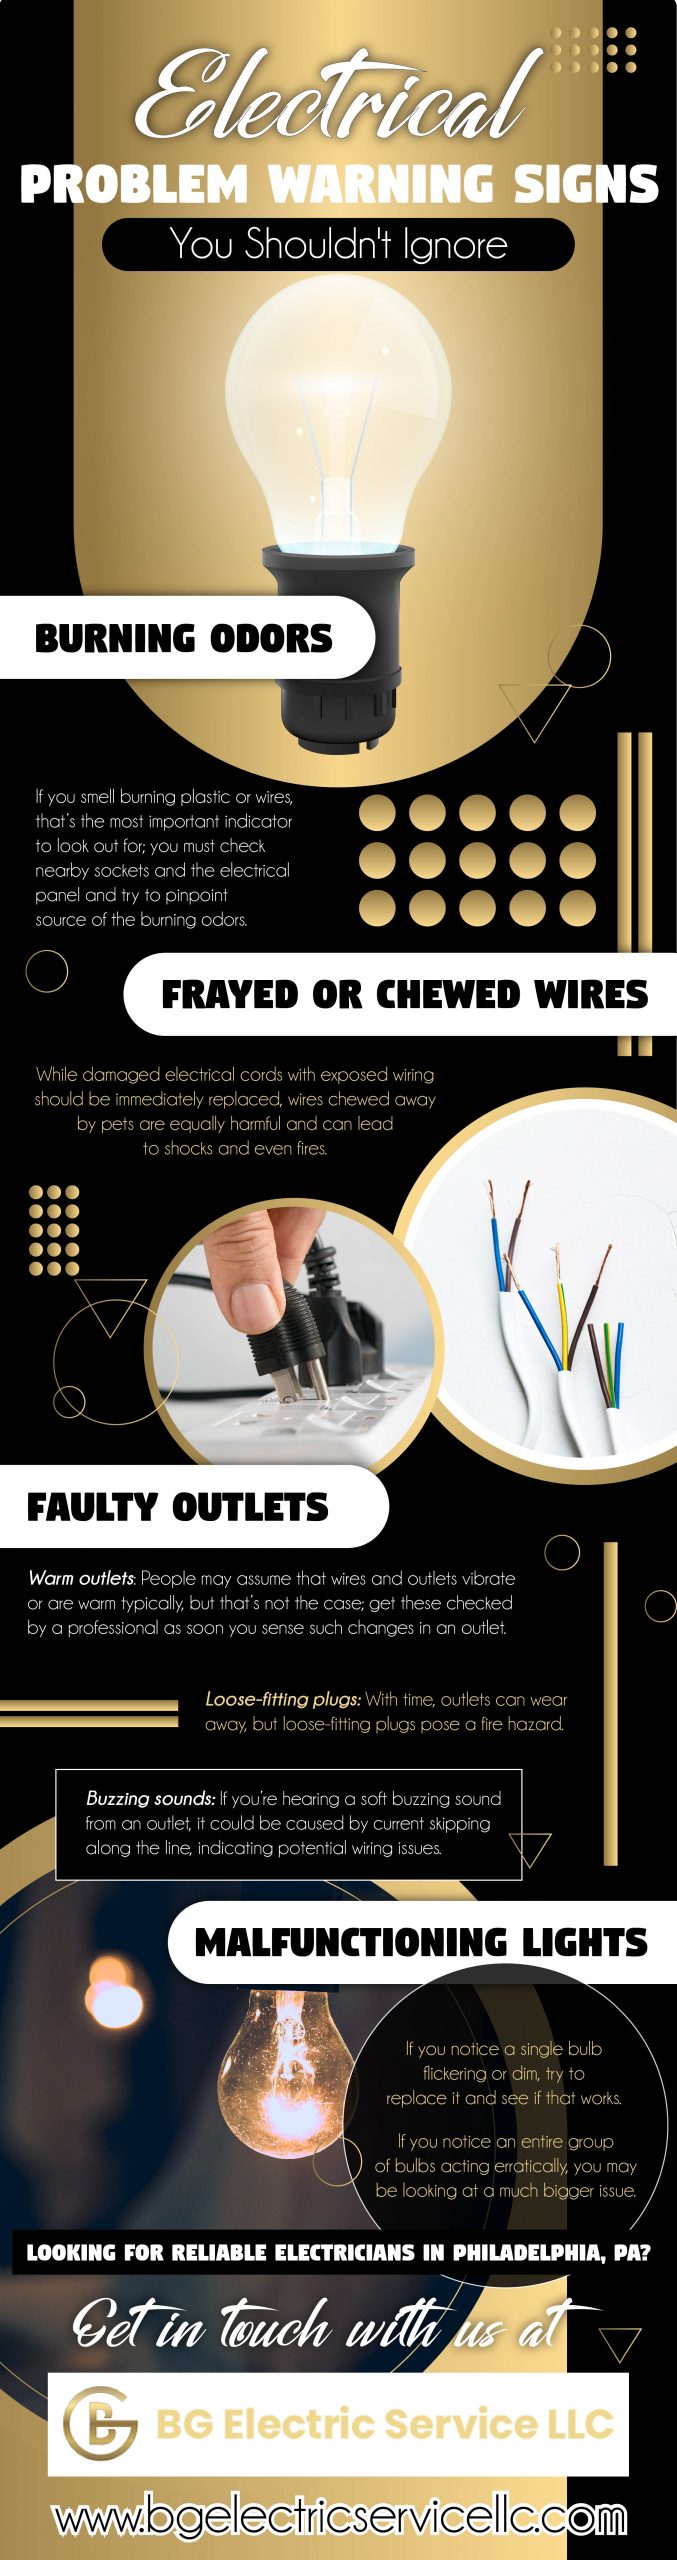 Electrical Problem Warning Signs